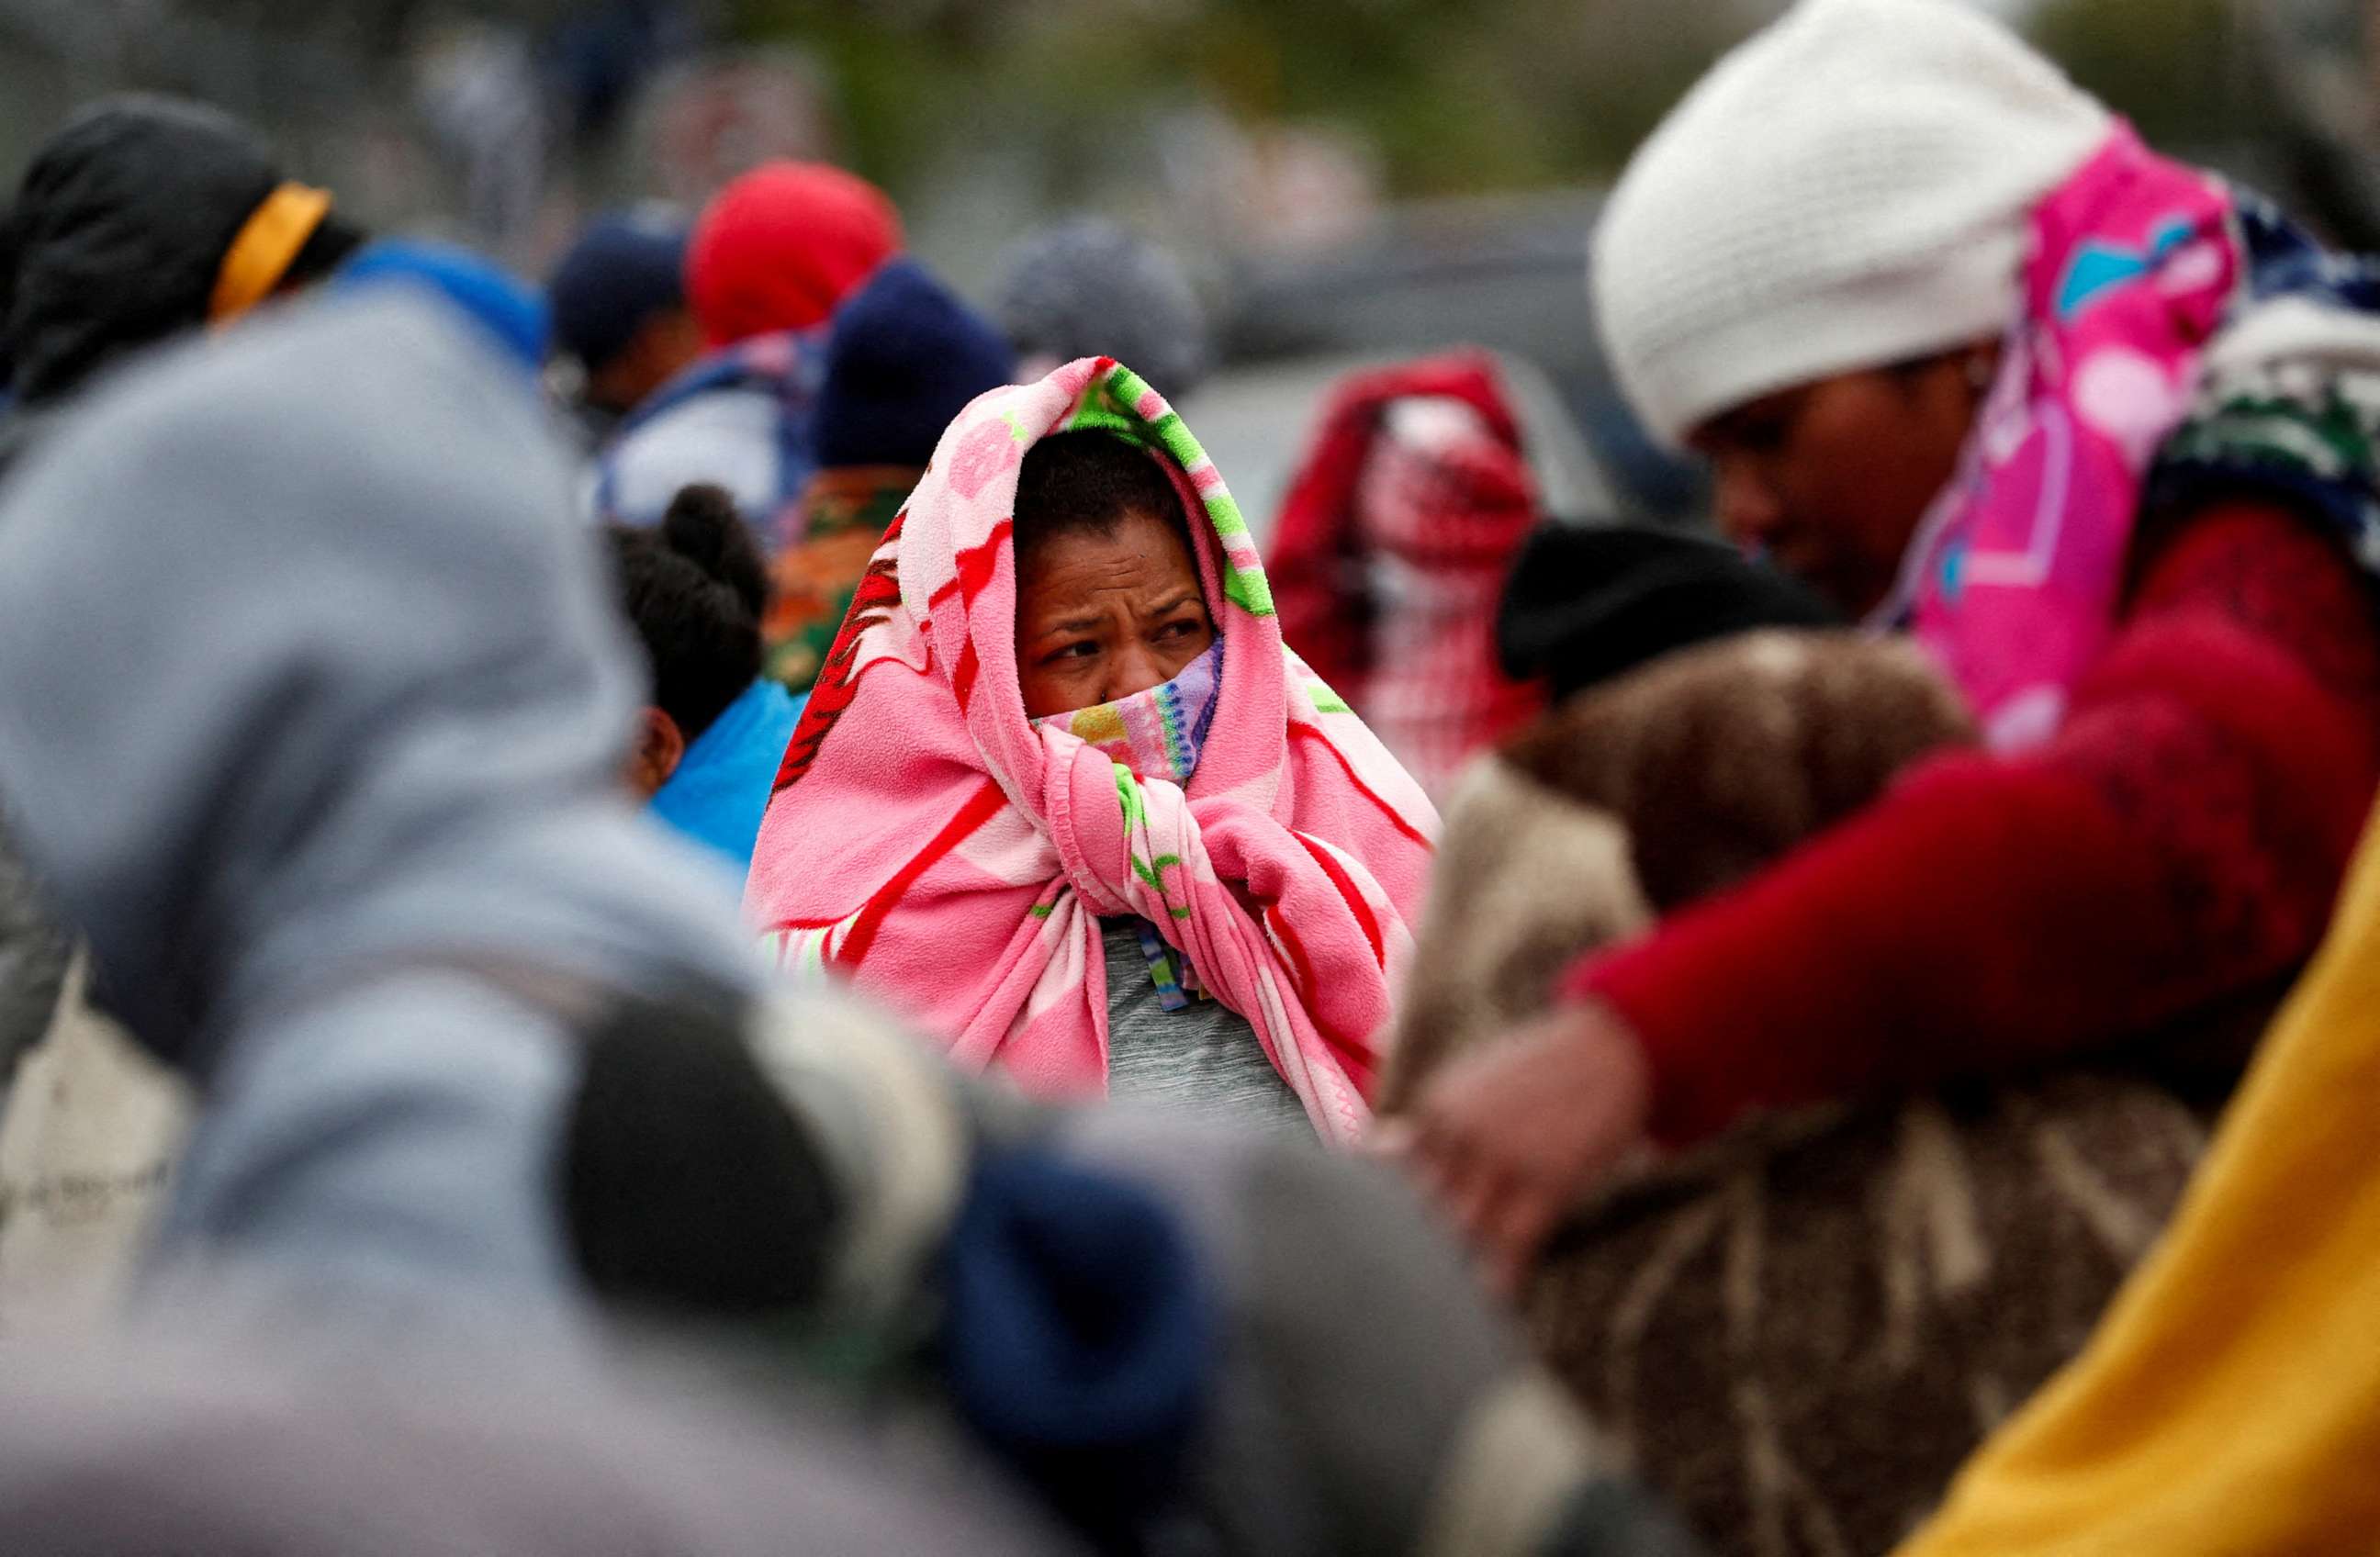 PHOTO: Asylum-seeking migrants stand covered with blankets during a day of high winds and low temperatures at a makeshift encampment near the border between the U.S. and Mexico.